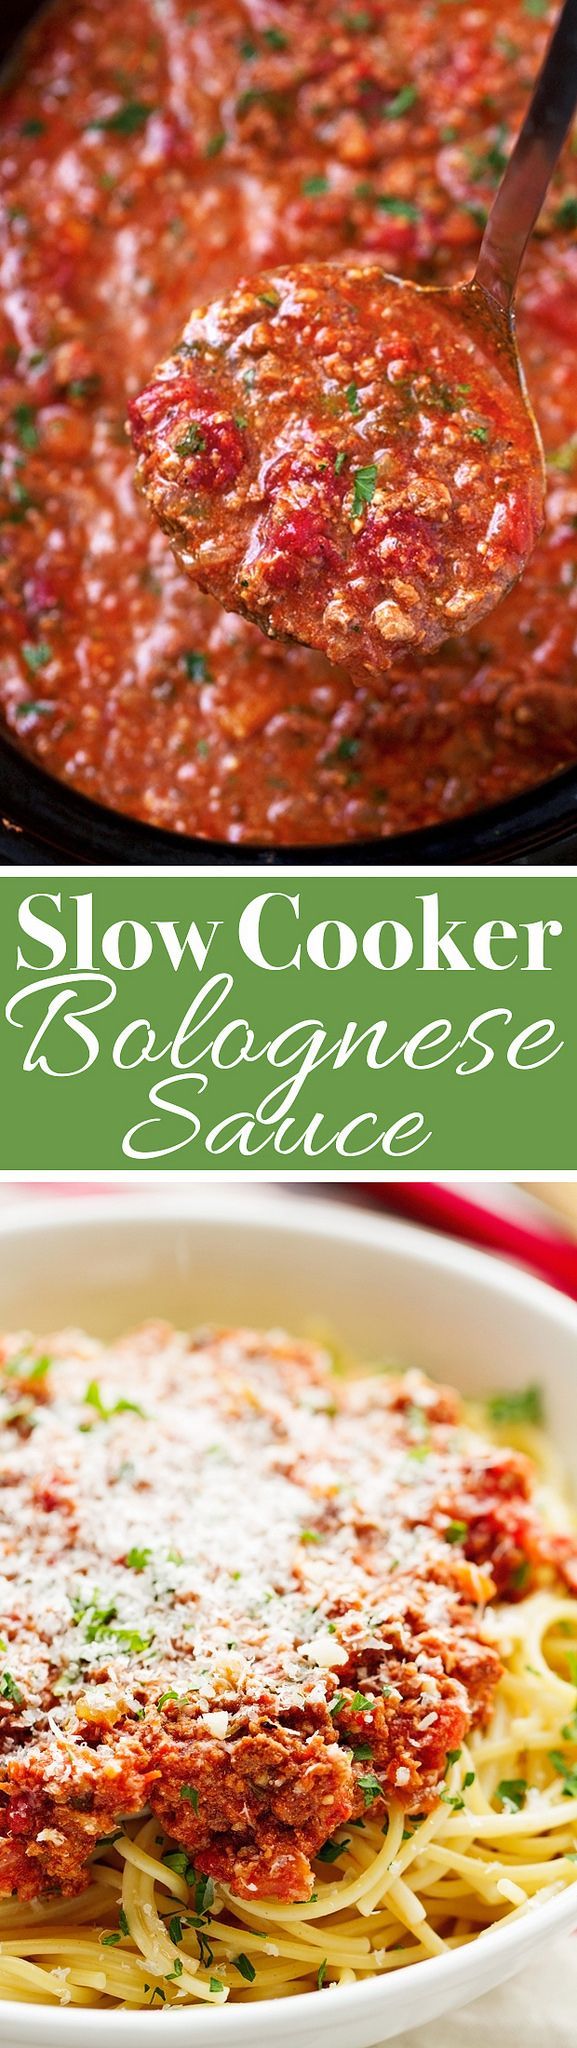 Slow Cooker Bolognese Sauce – Made with simple ingredients but it’s the best meat sauce you’ll ever experience!